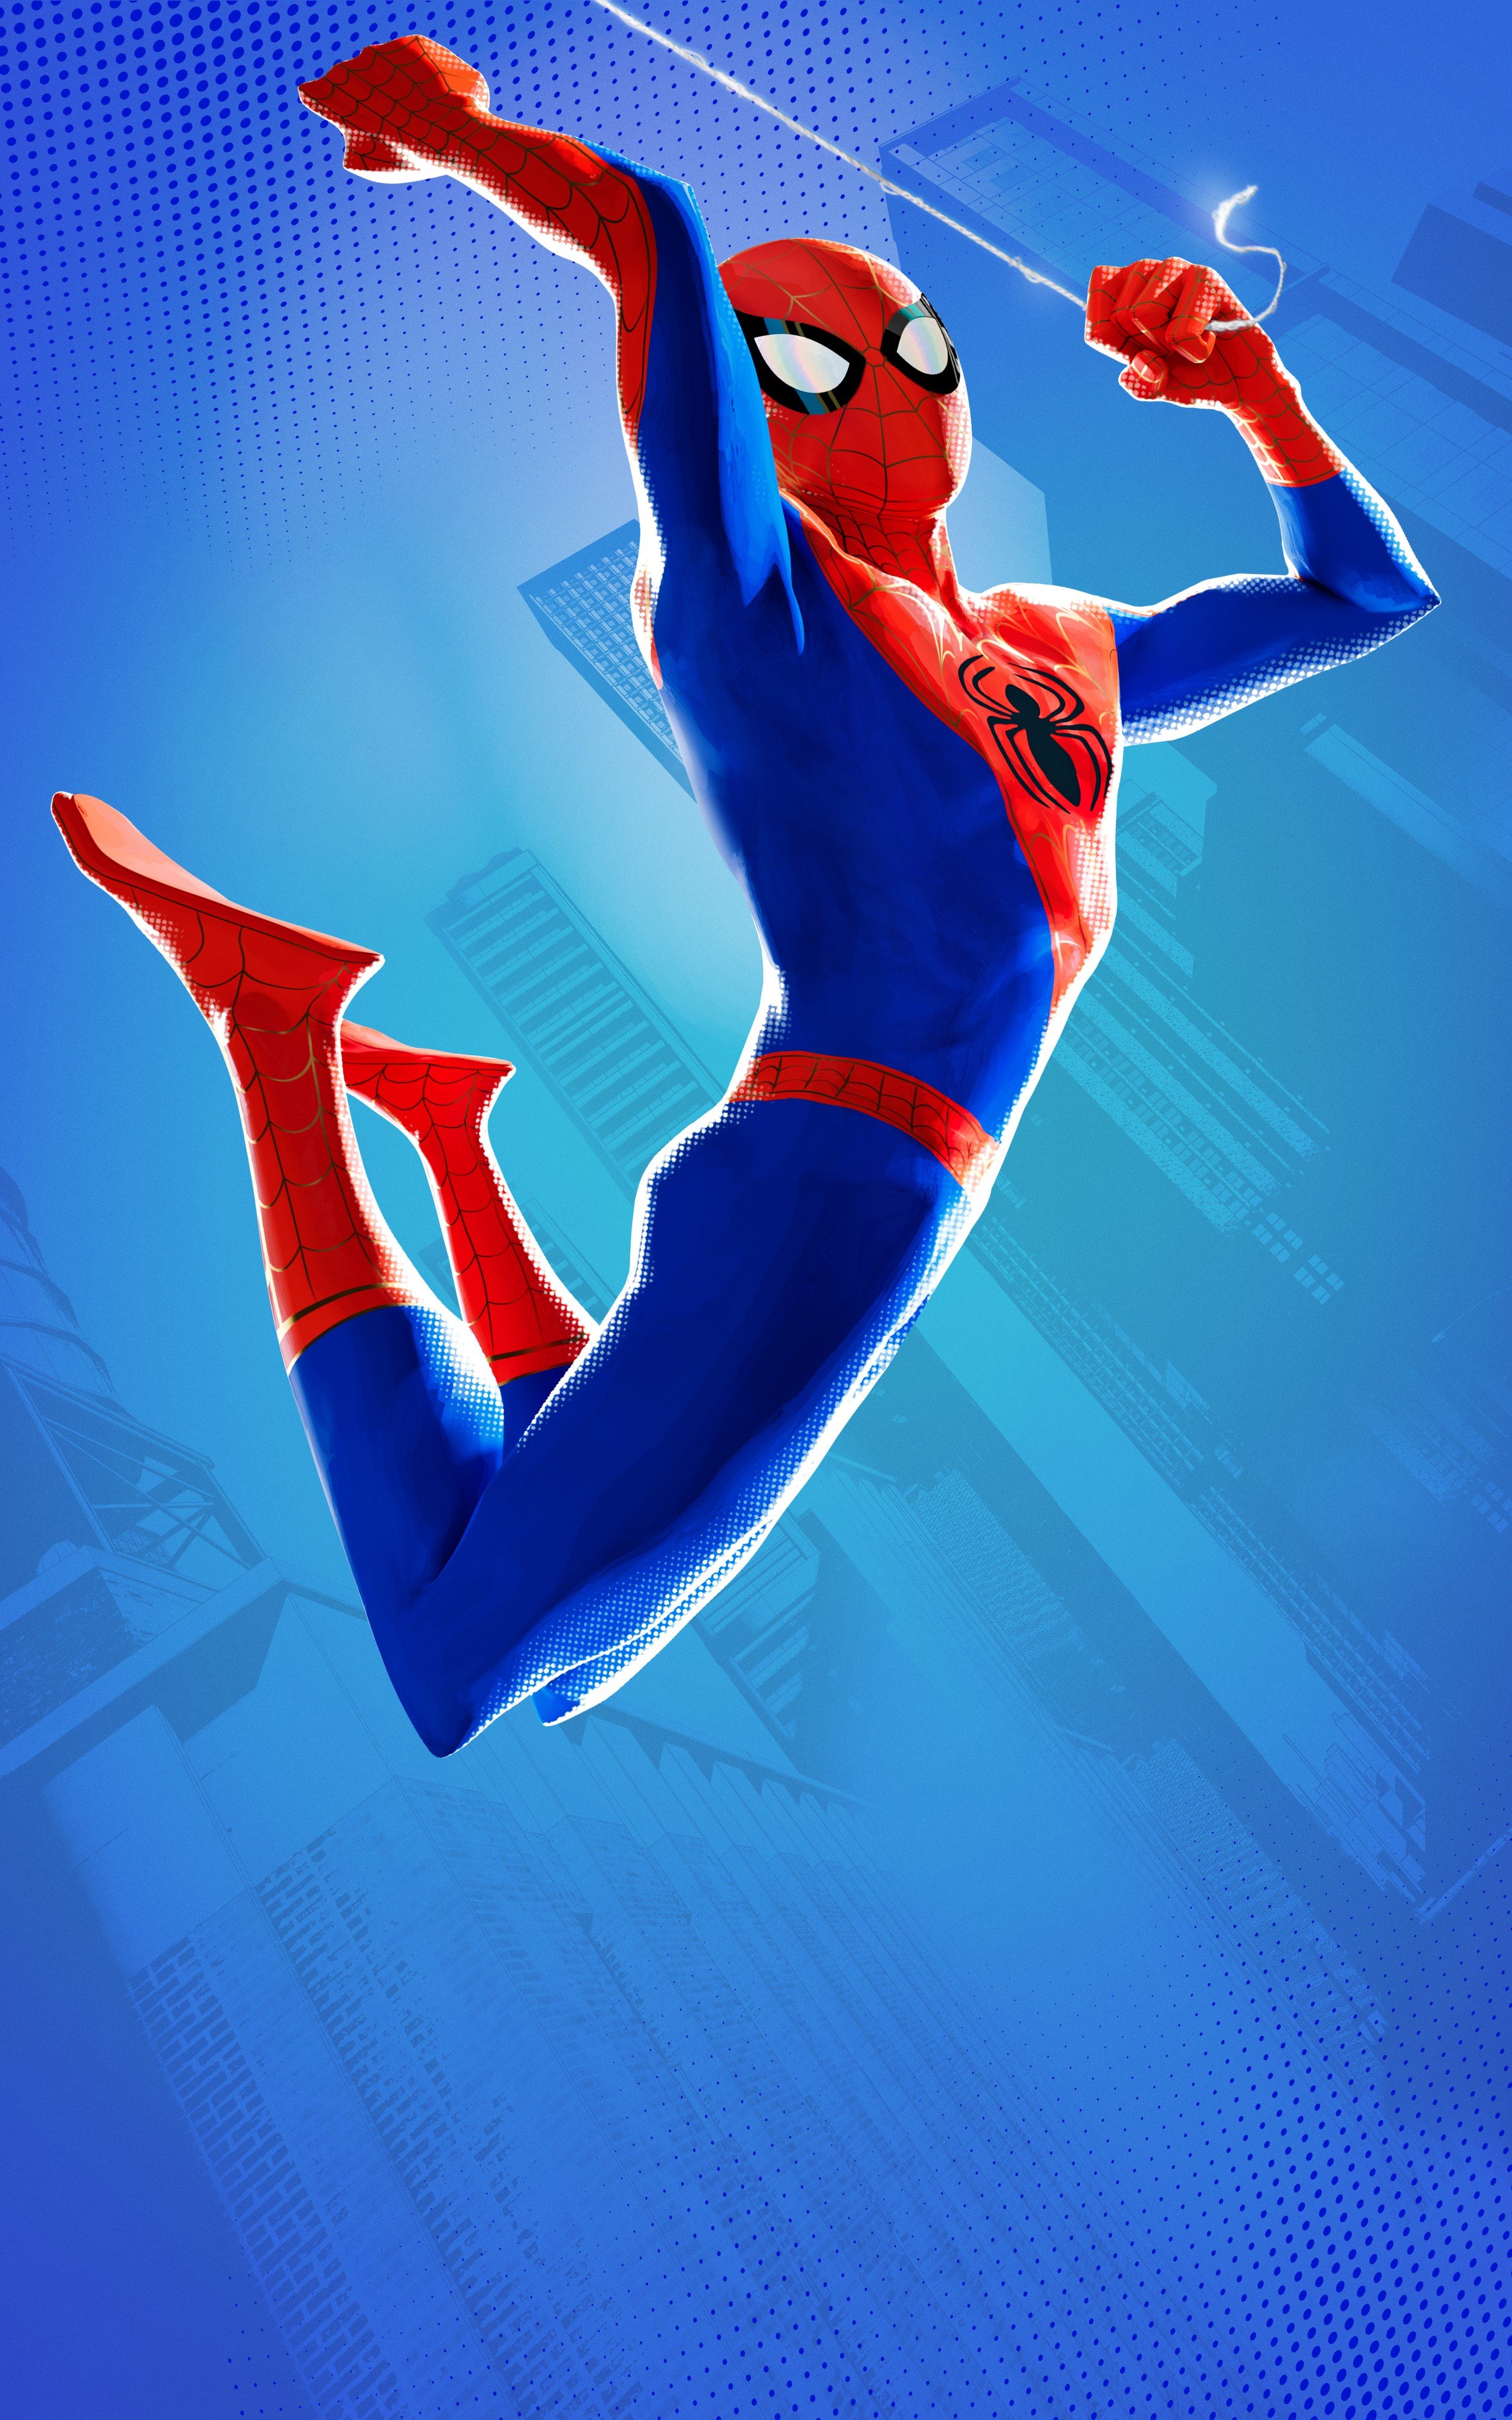 Spider Man Into The Spider Verse Wallpaper Ipad : Android users need to